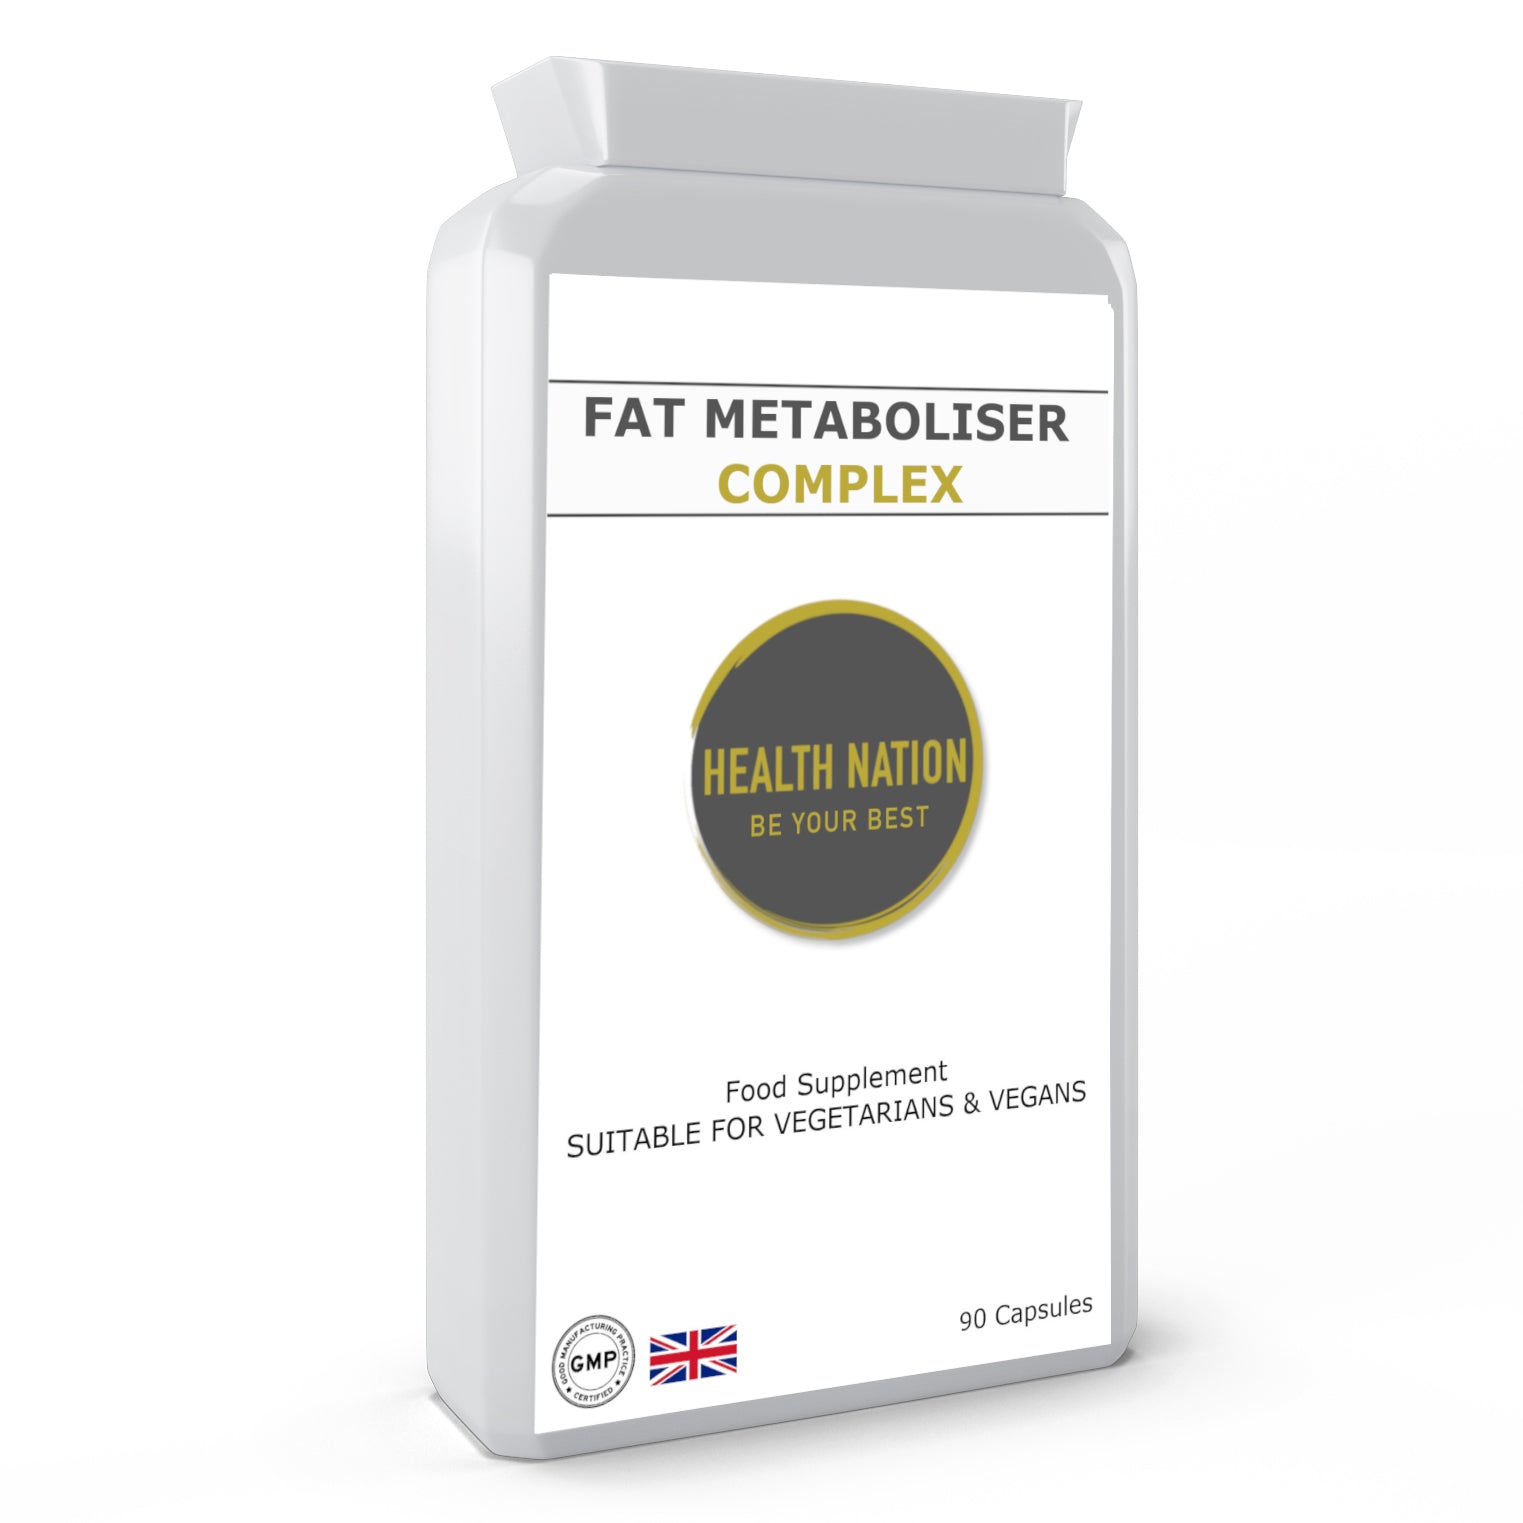 Fat Metaboliser Complex | Helps with Natural Fat Burning, Weight Loss, Gut/Digestion, Energy and Balances Blood Sugar | Made in UK | 90 Capsules - Health Nation